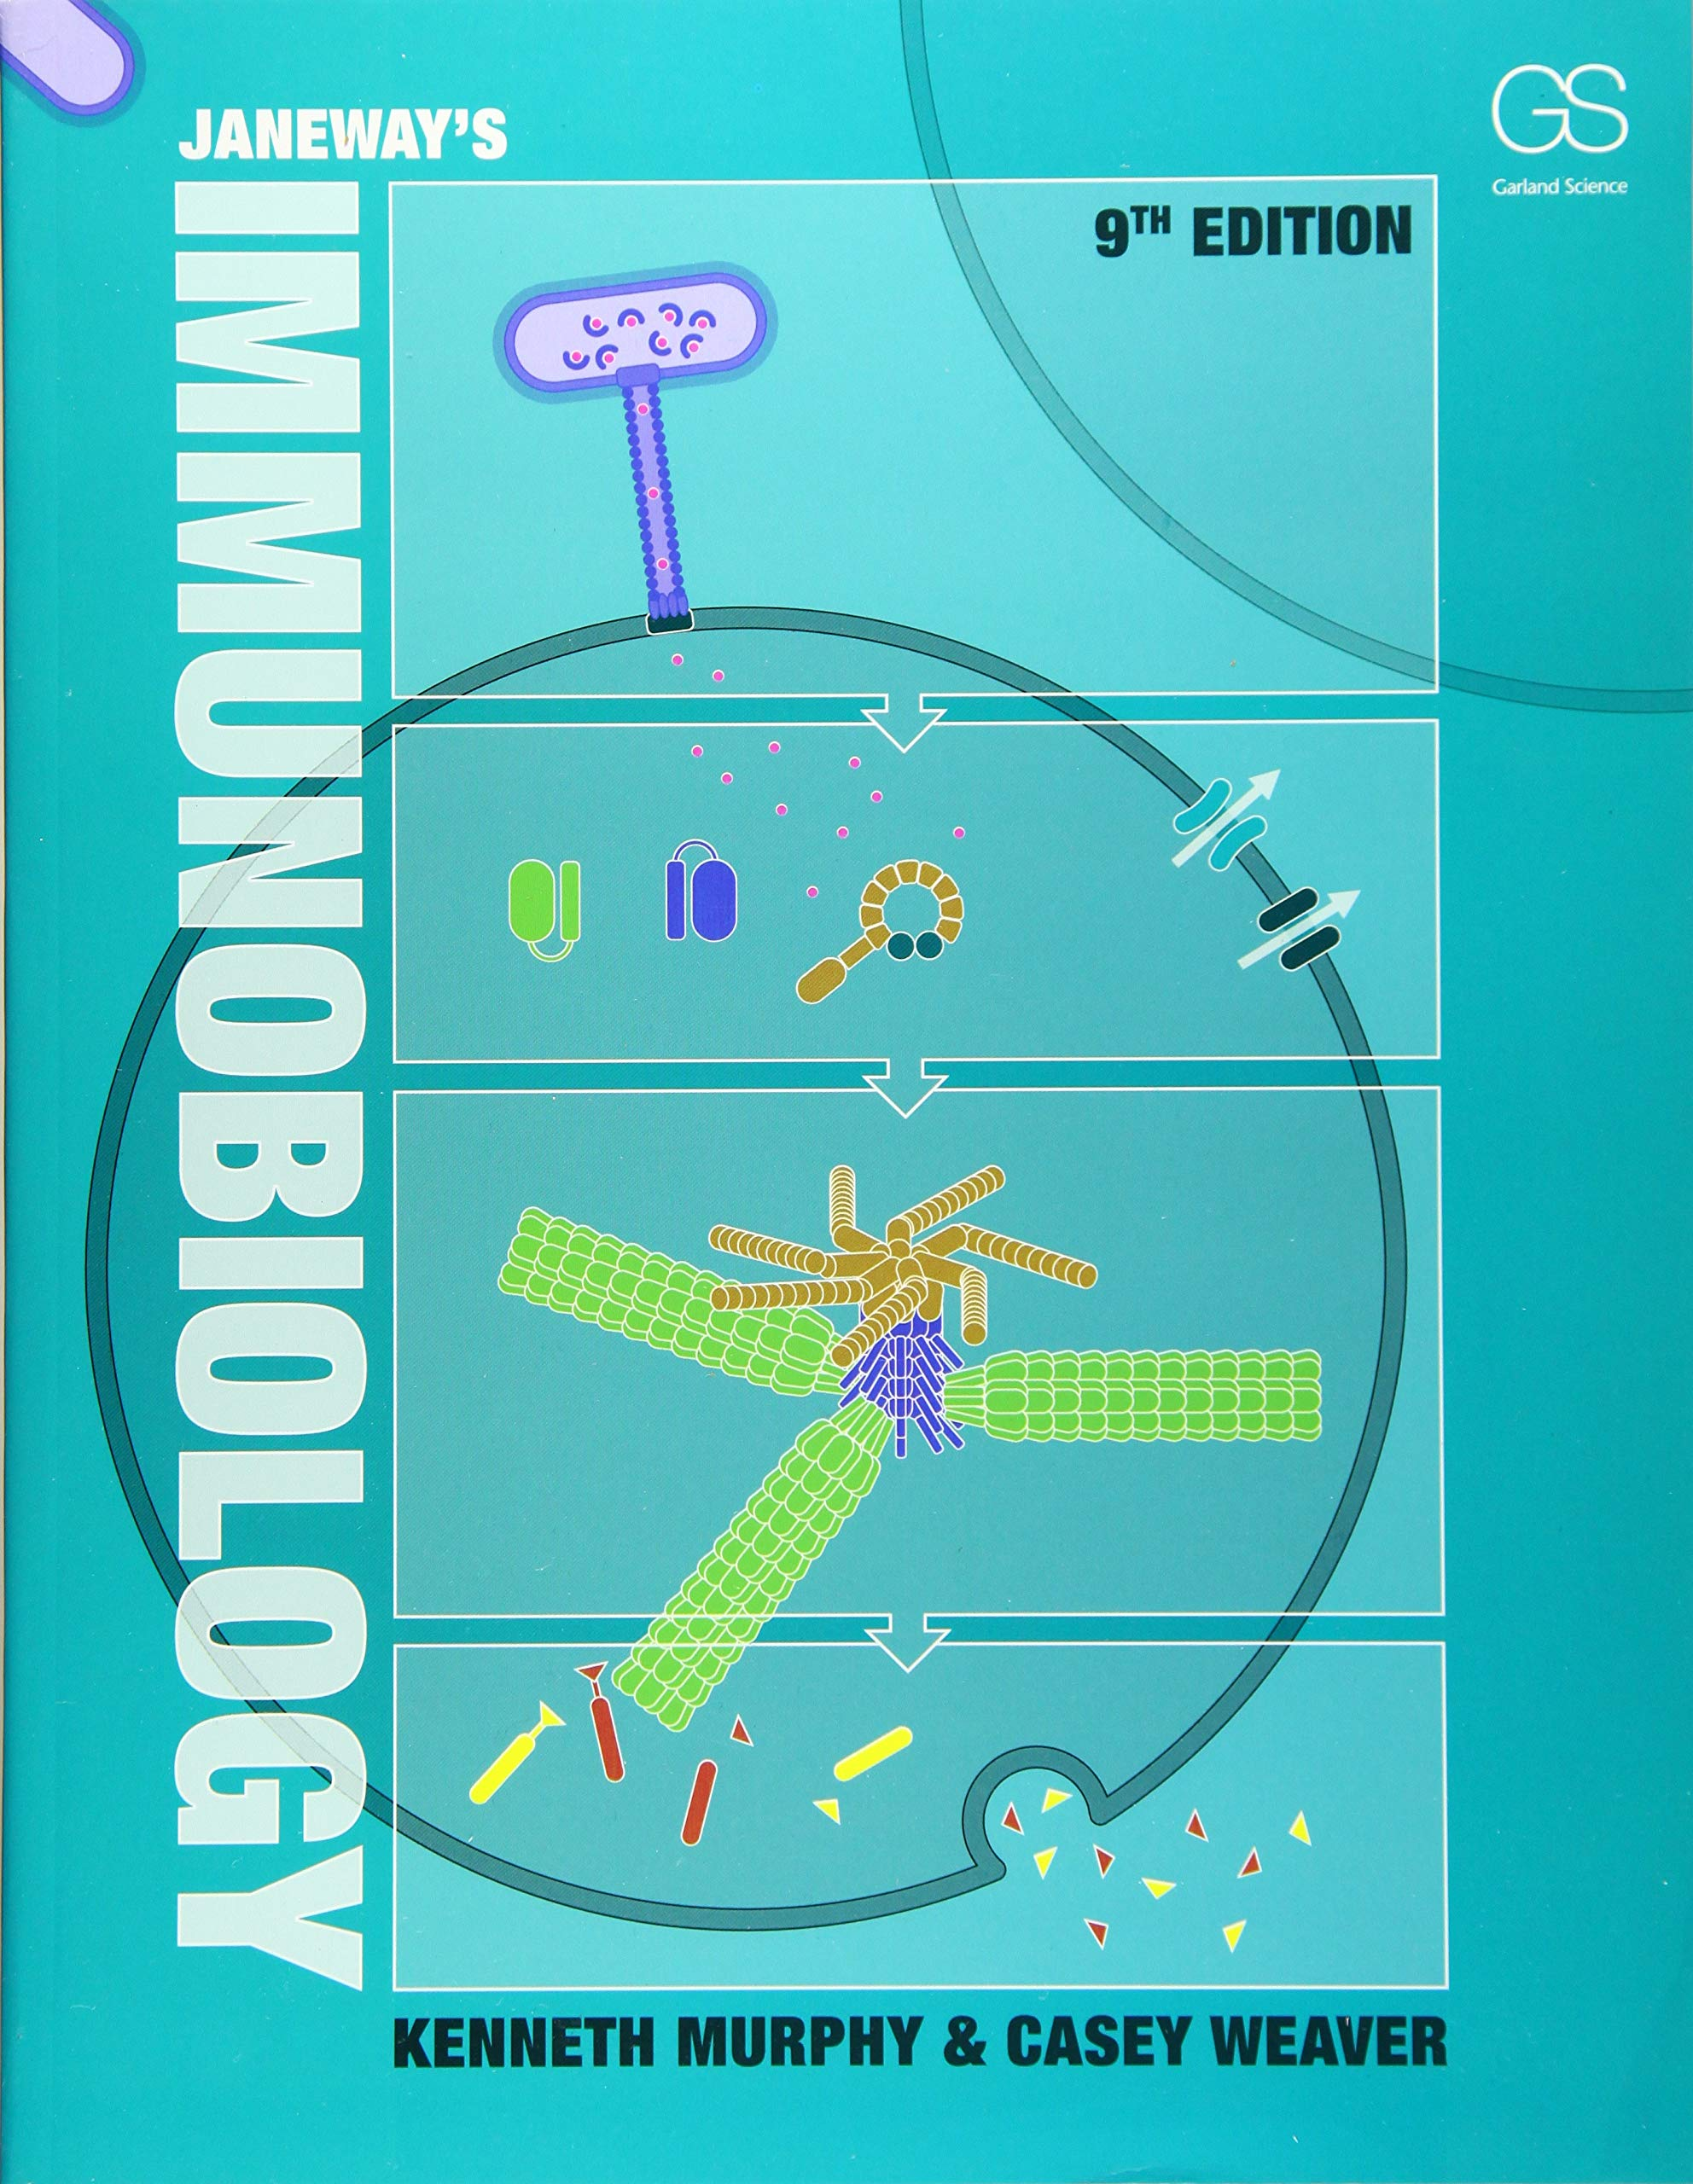 "Janeway's Immunobiology" by Kenneth Murphy, Casey Weaver, and Carla Rothlin